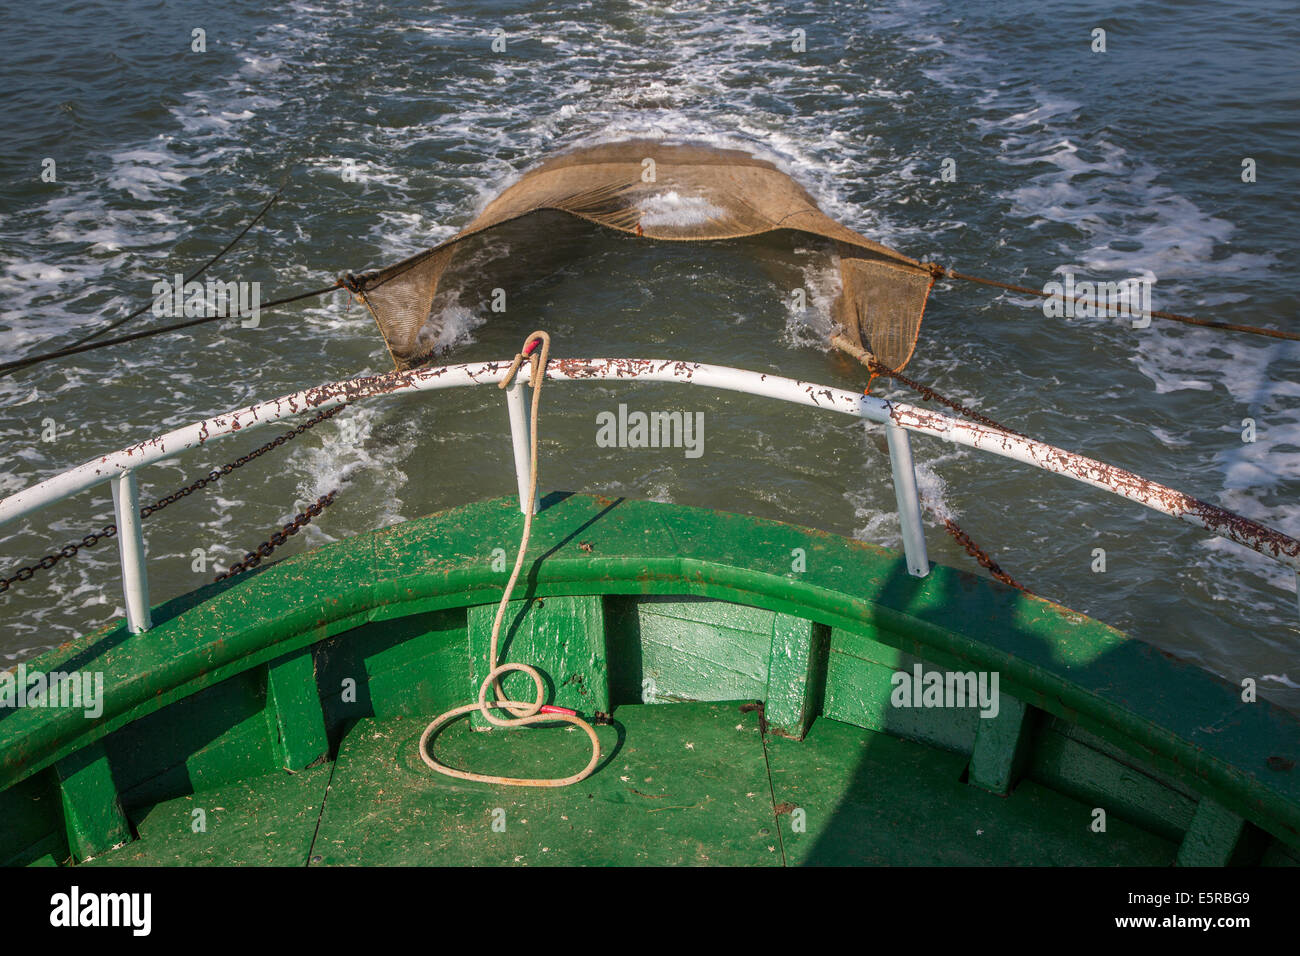 Shrimp boat with fish net fishing for shrimps on the North Sea Stock Photo